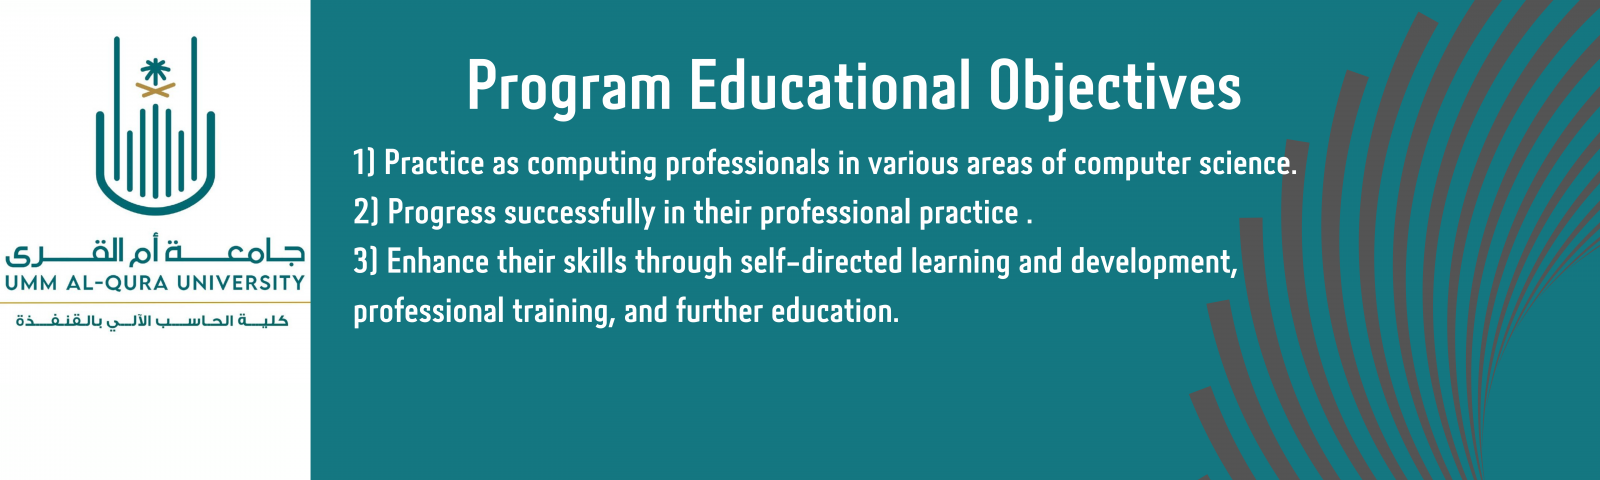 Educational Objectives of the Program